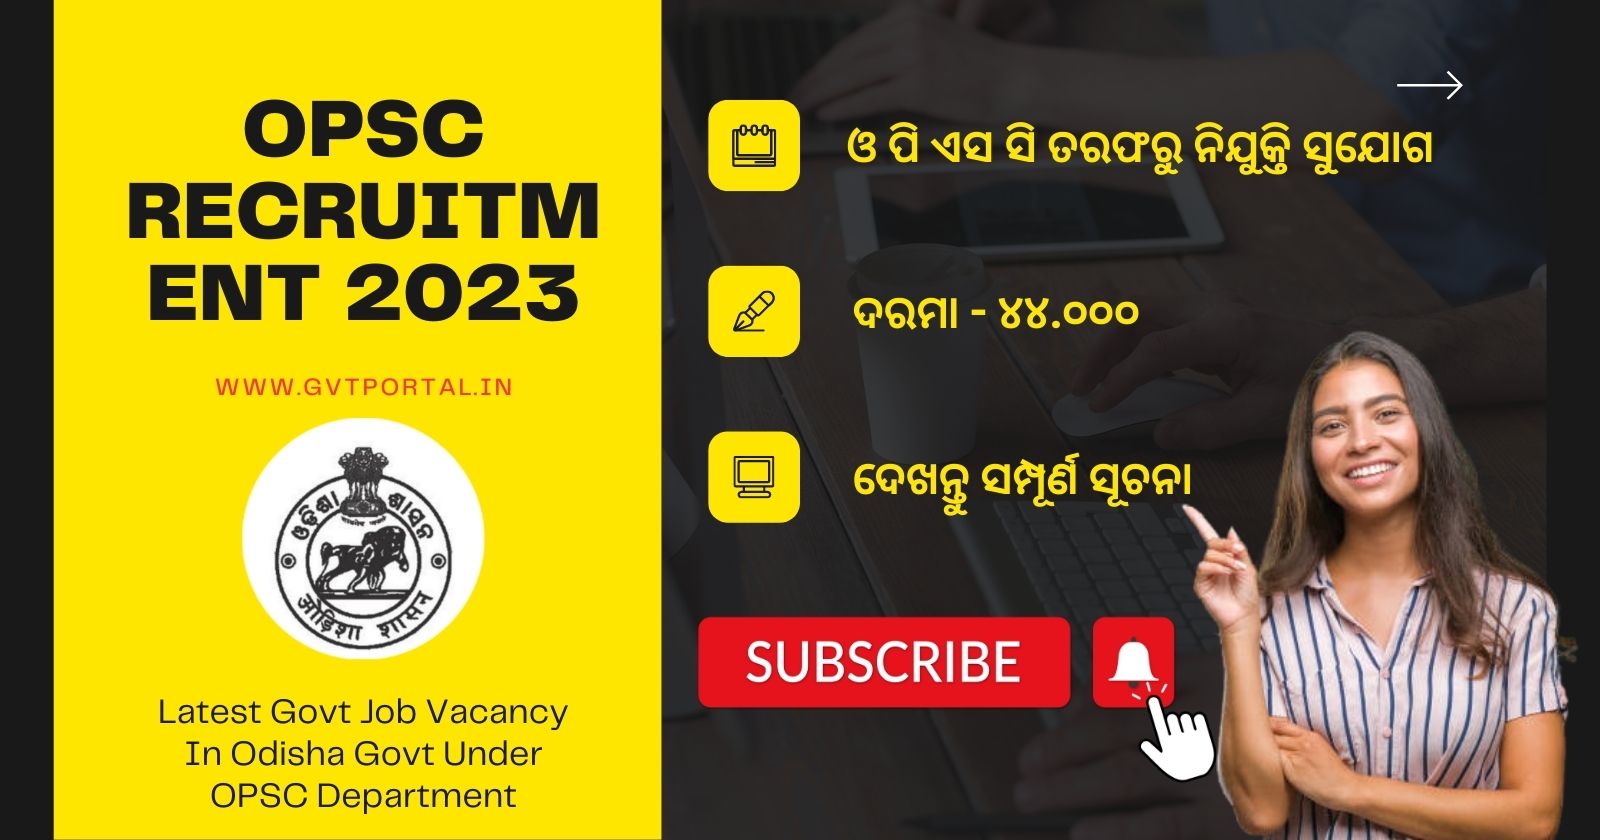 OPSC Assistant Director of Textiles Recruitment 2023